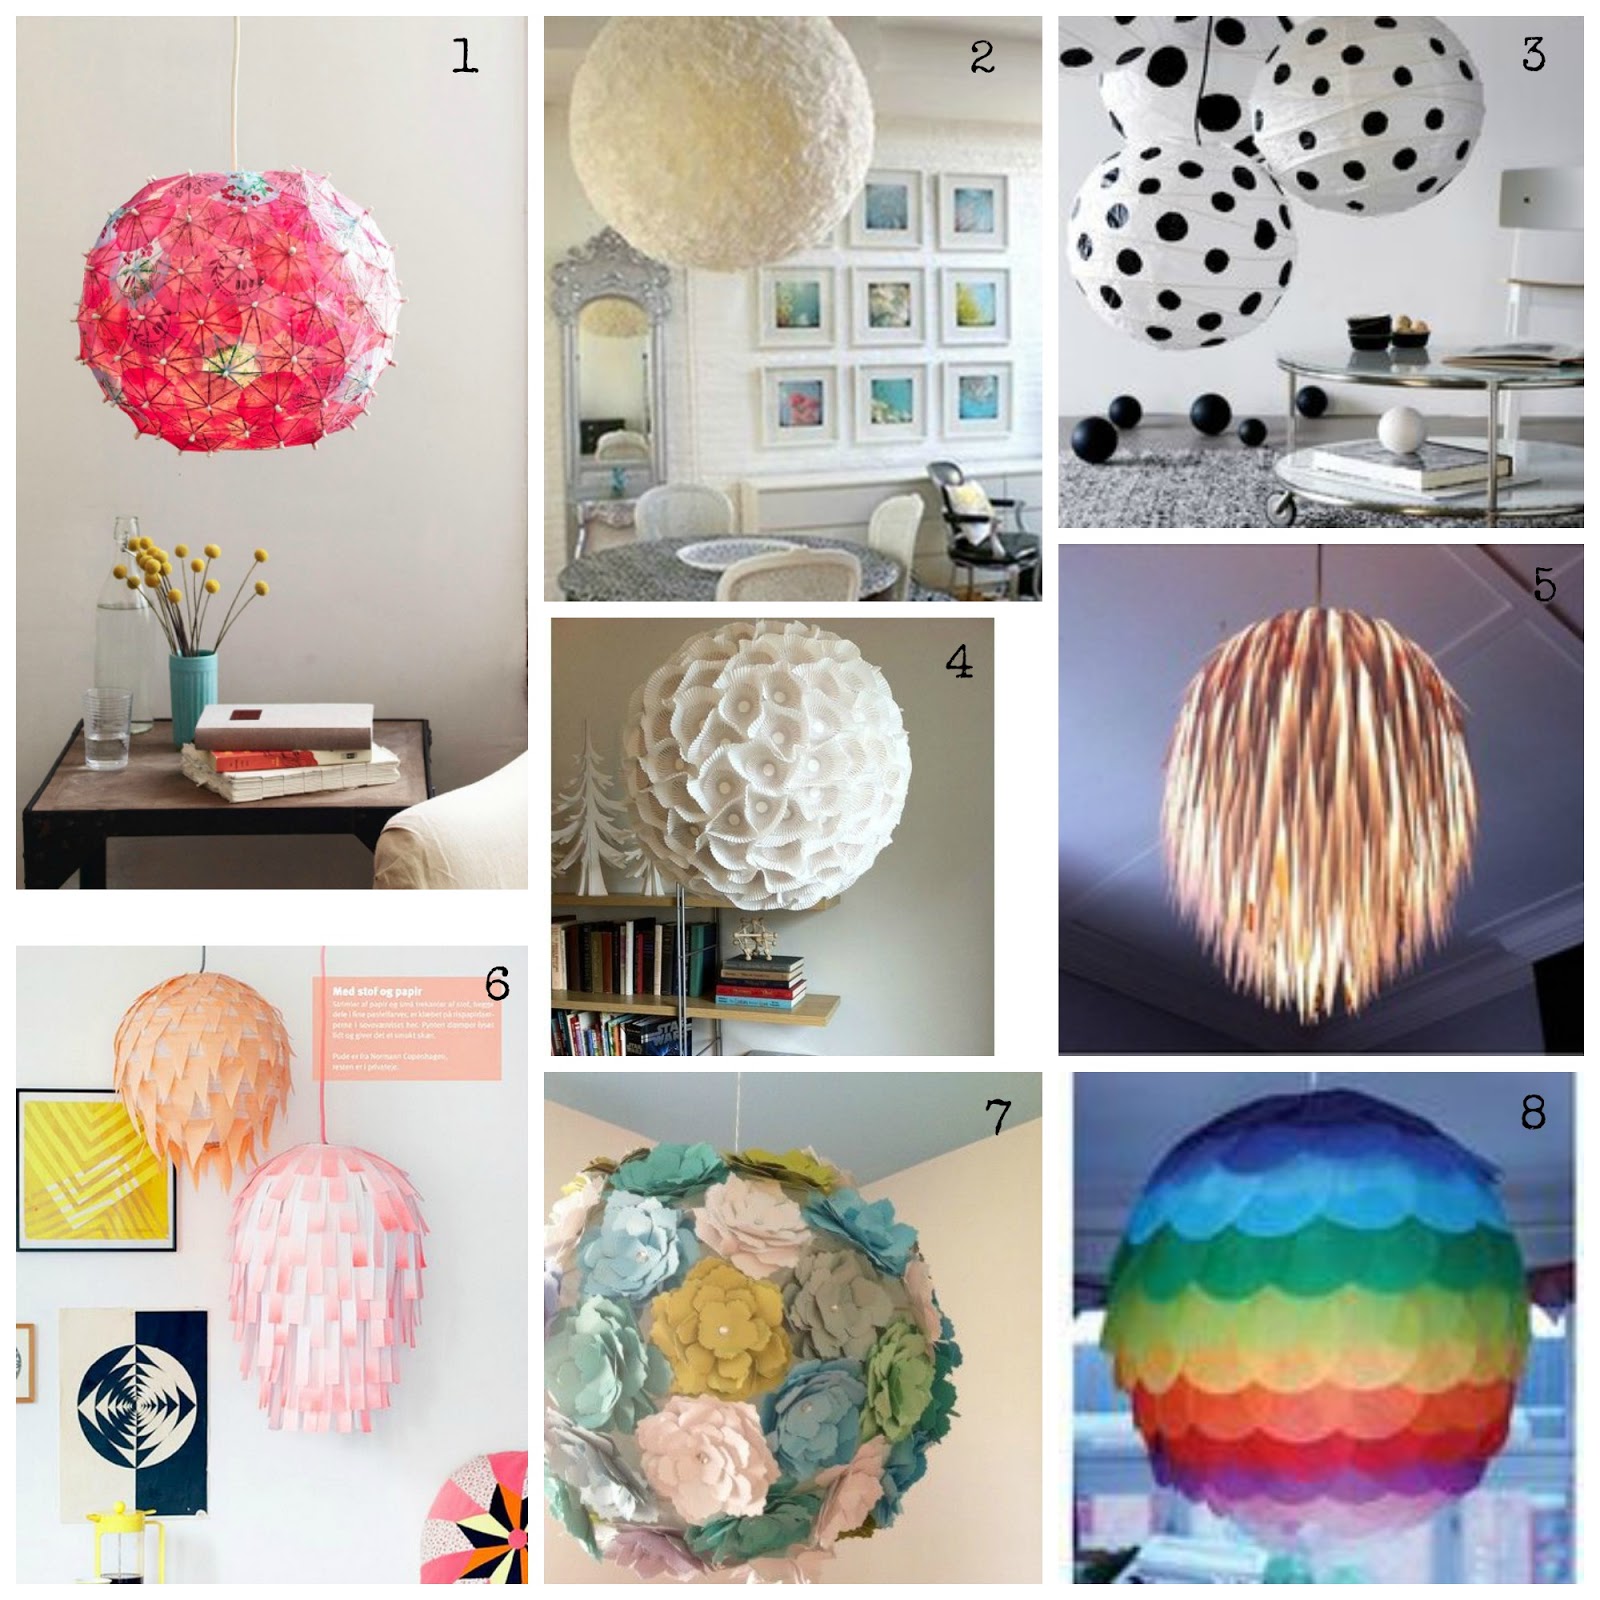 diy paper lamps, many colorful ideas and imagination